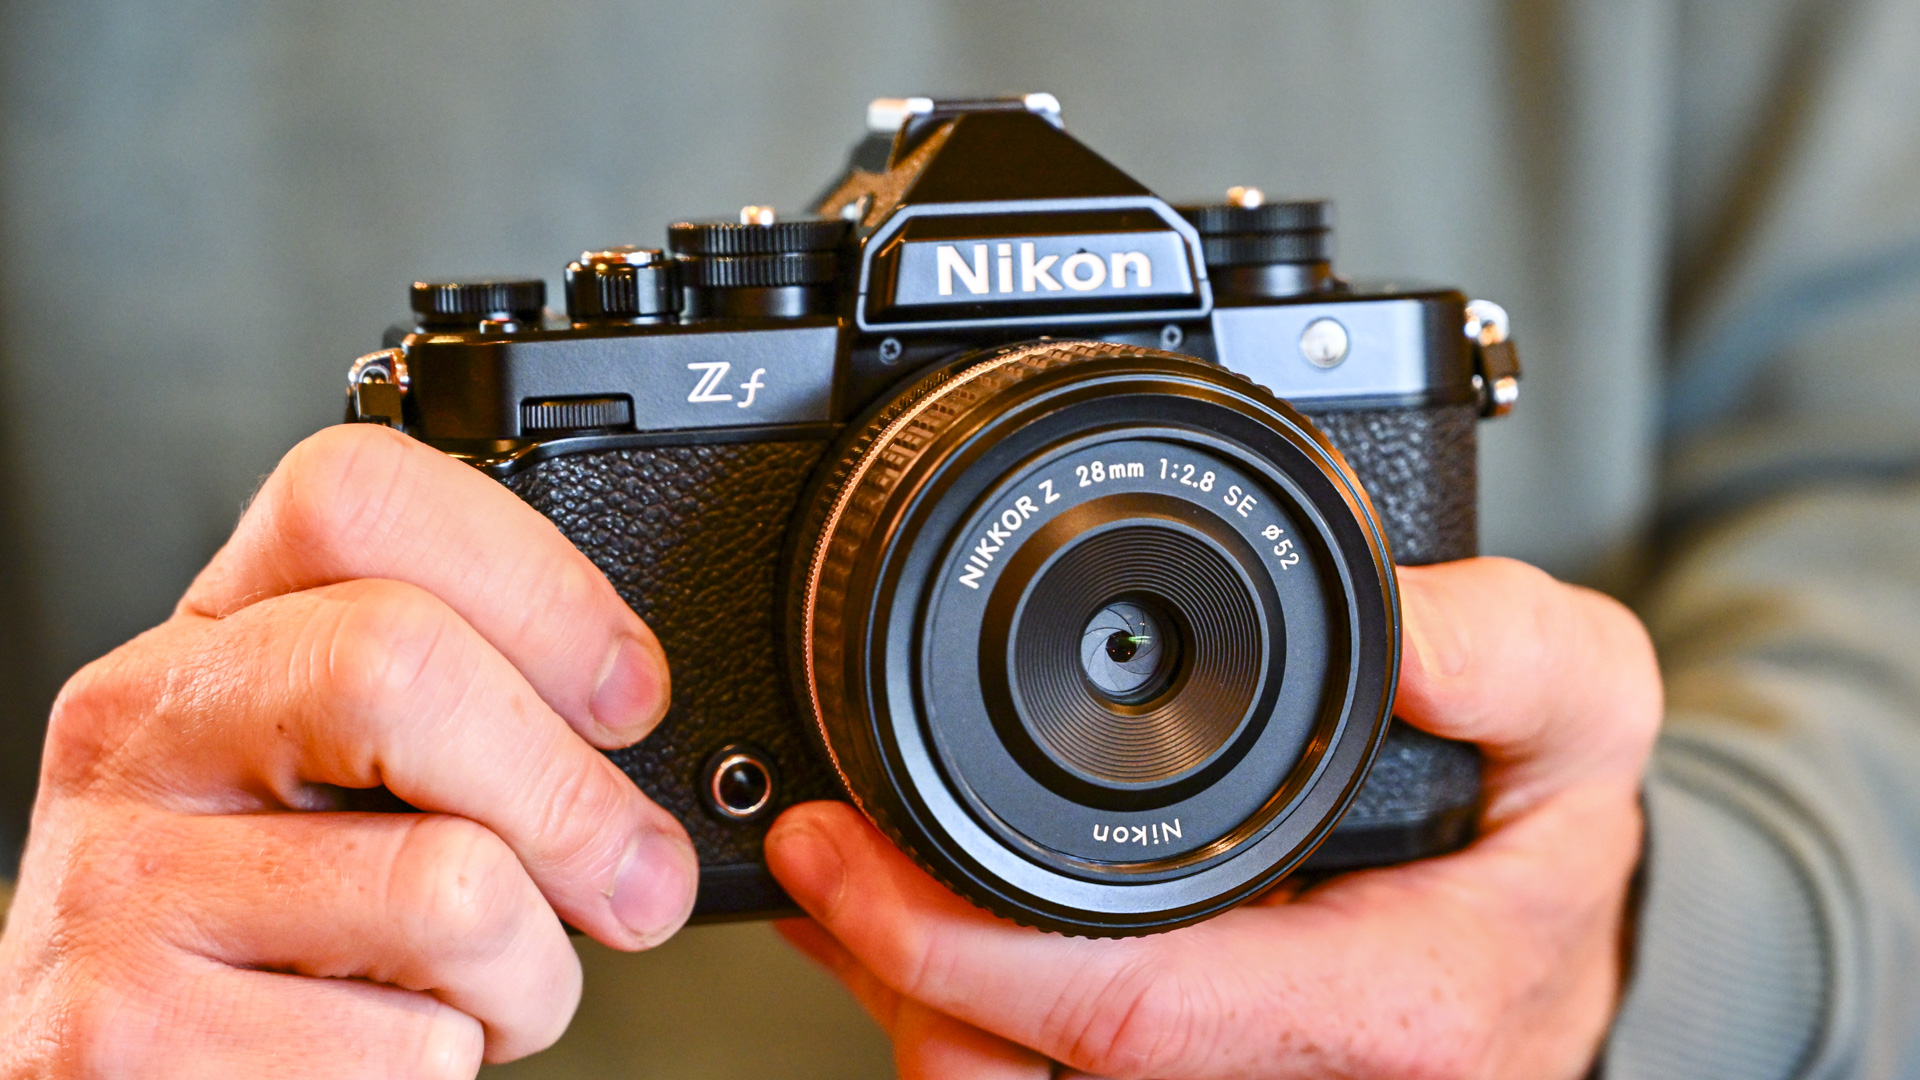 Nikon Zf camera in the hand with Z 28mm F2.8 SE lens attached